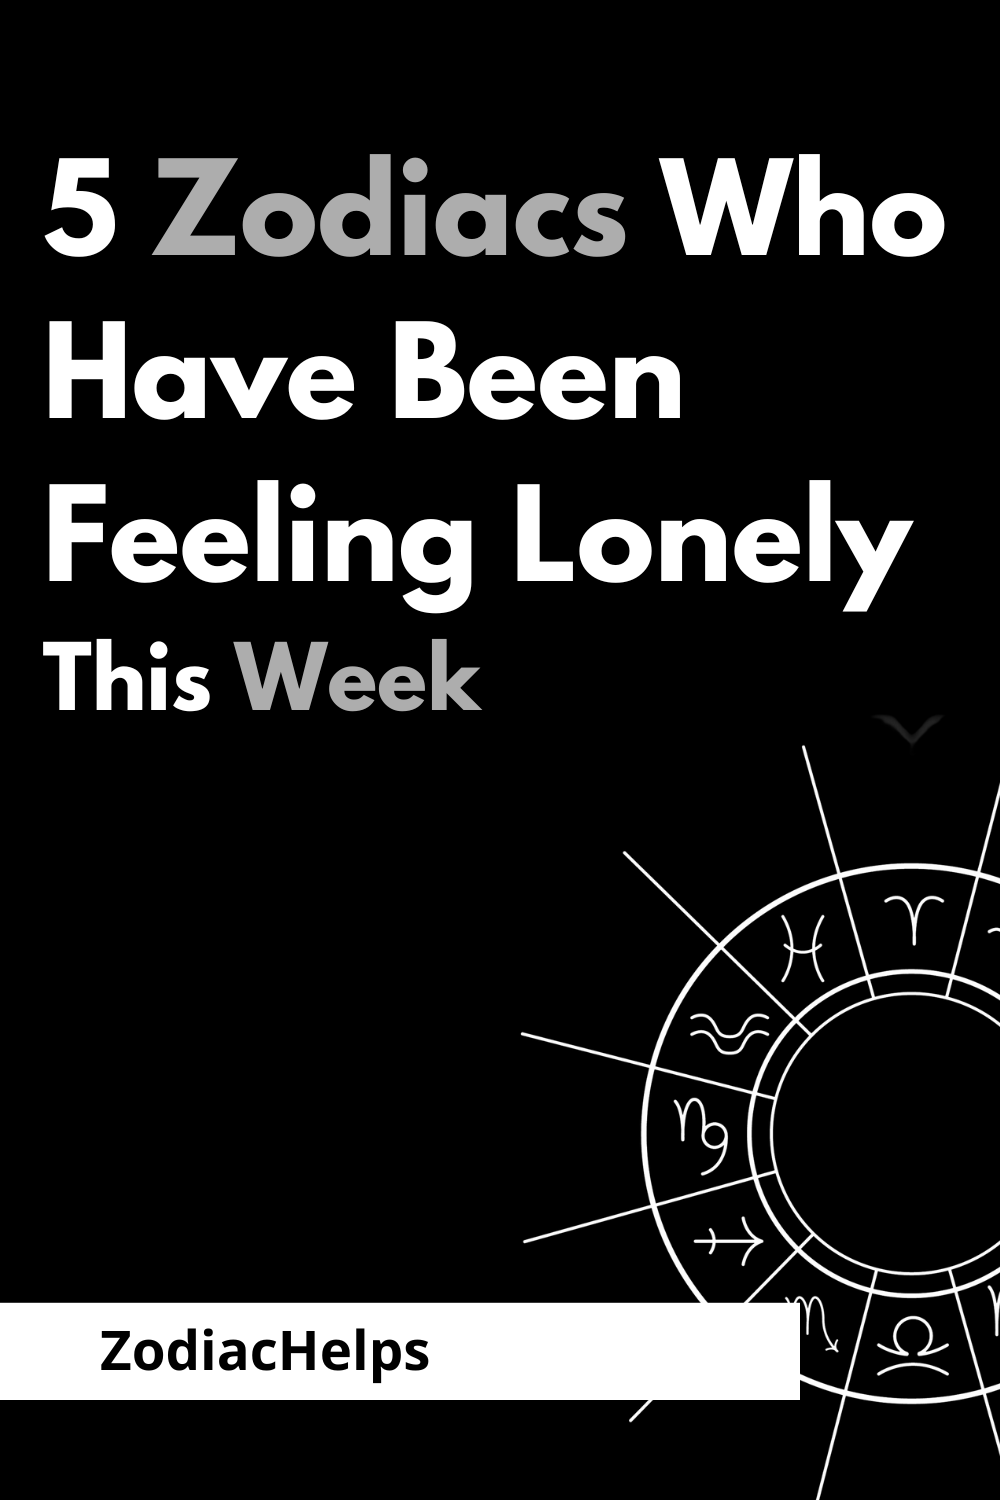 5 Zodiacs Who Have Been Feeling Lonely This Week